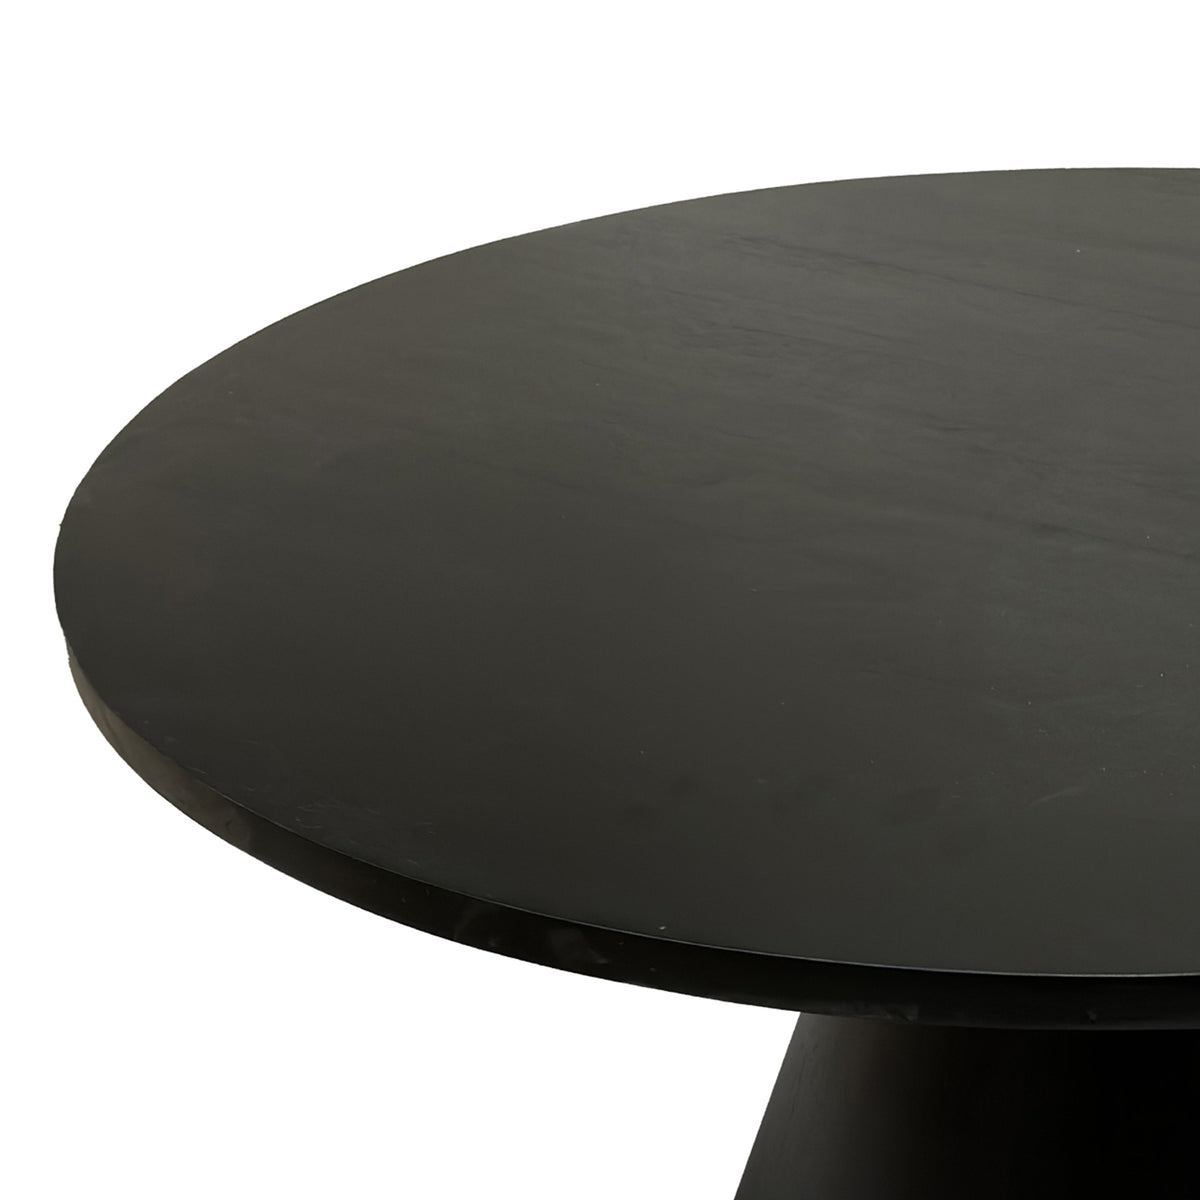 Fawn 32 Inch Coffee Table, Black Mango Wood Round Top, Modern Tapered Pedestal Base, Shiny Brass Support - UPT-295601